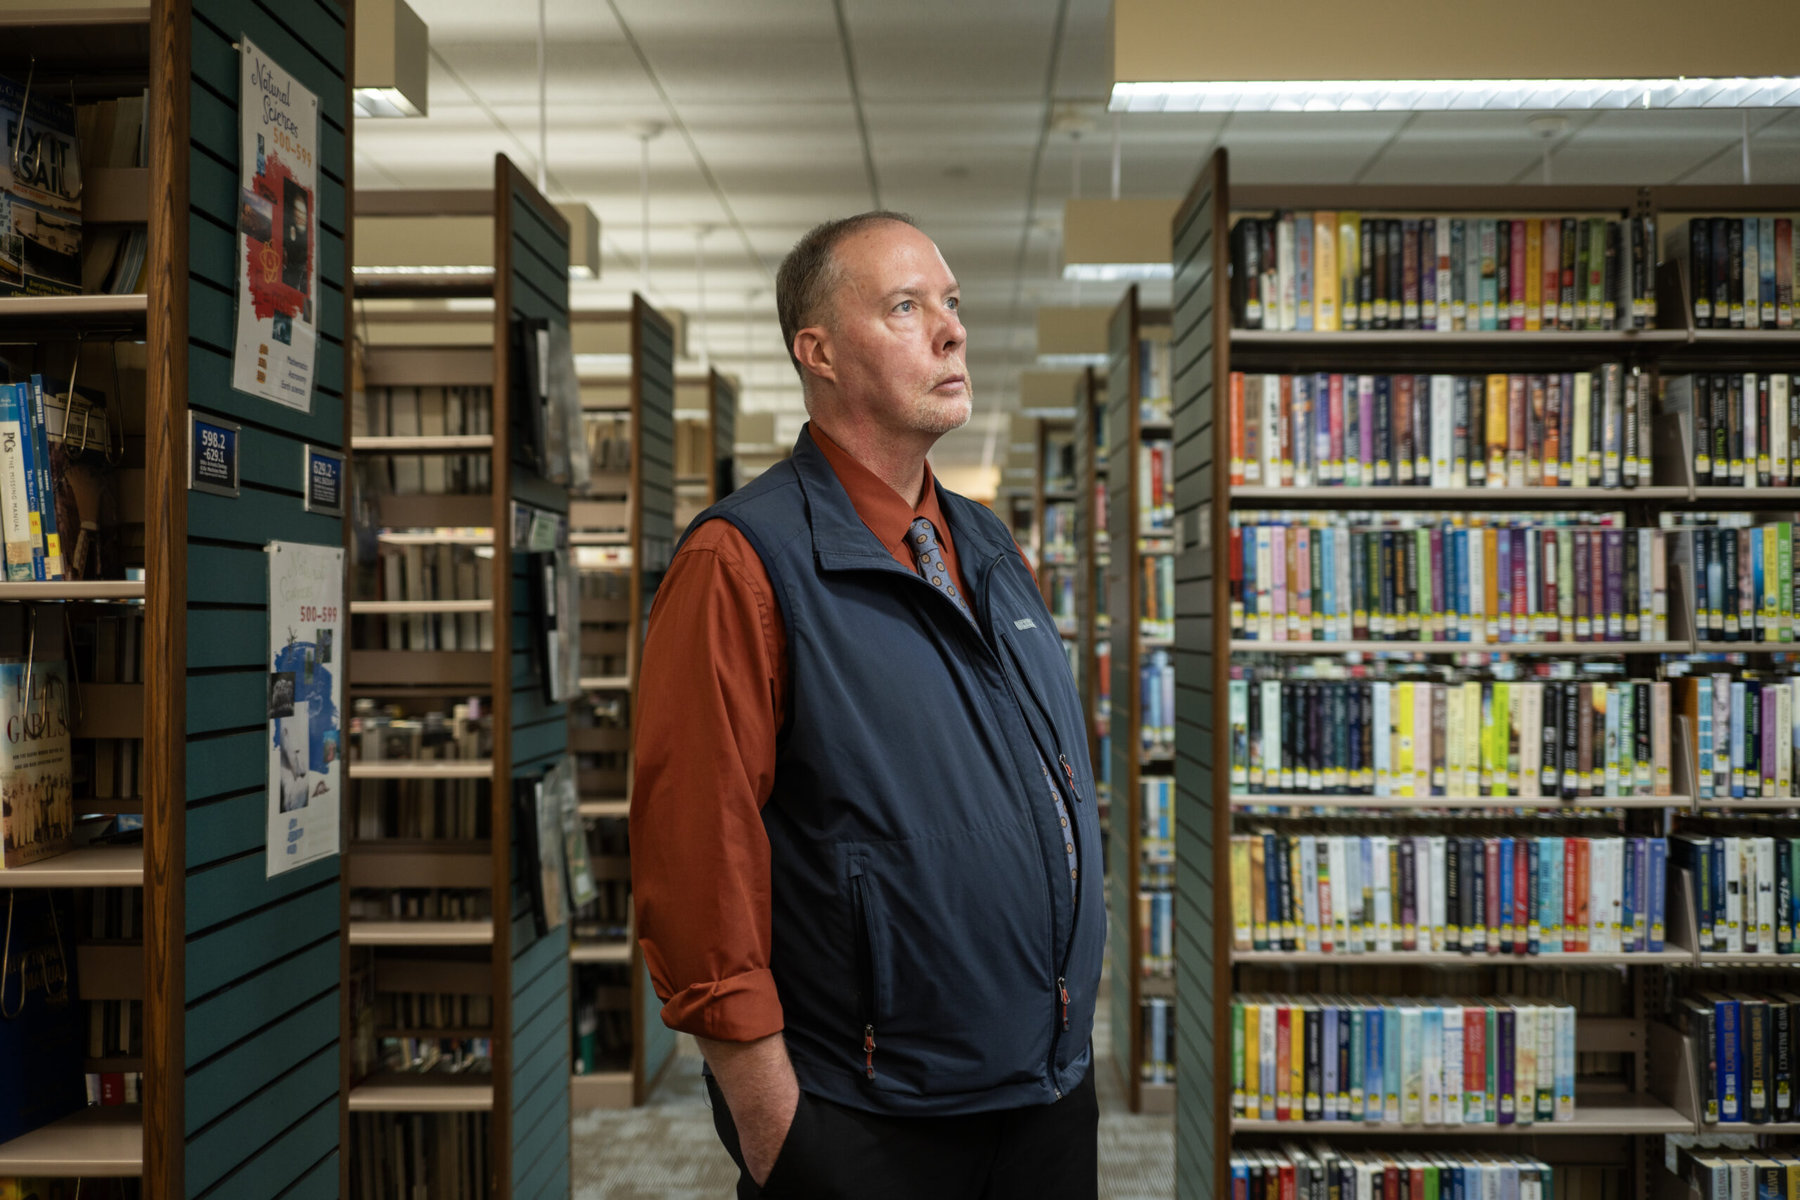 Matt Pfisterer, director of the Thrall Public Library District in Middletown, New York, stands in a library.